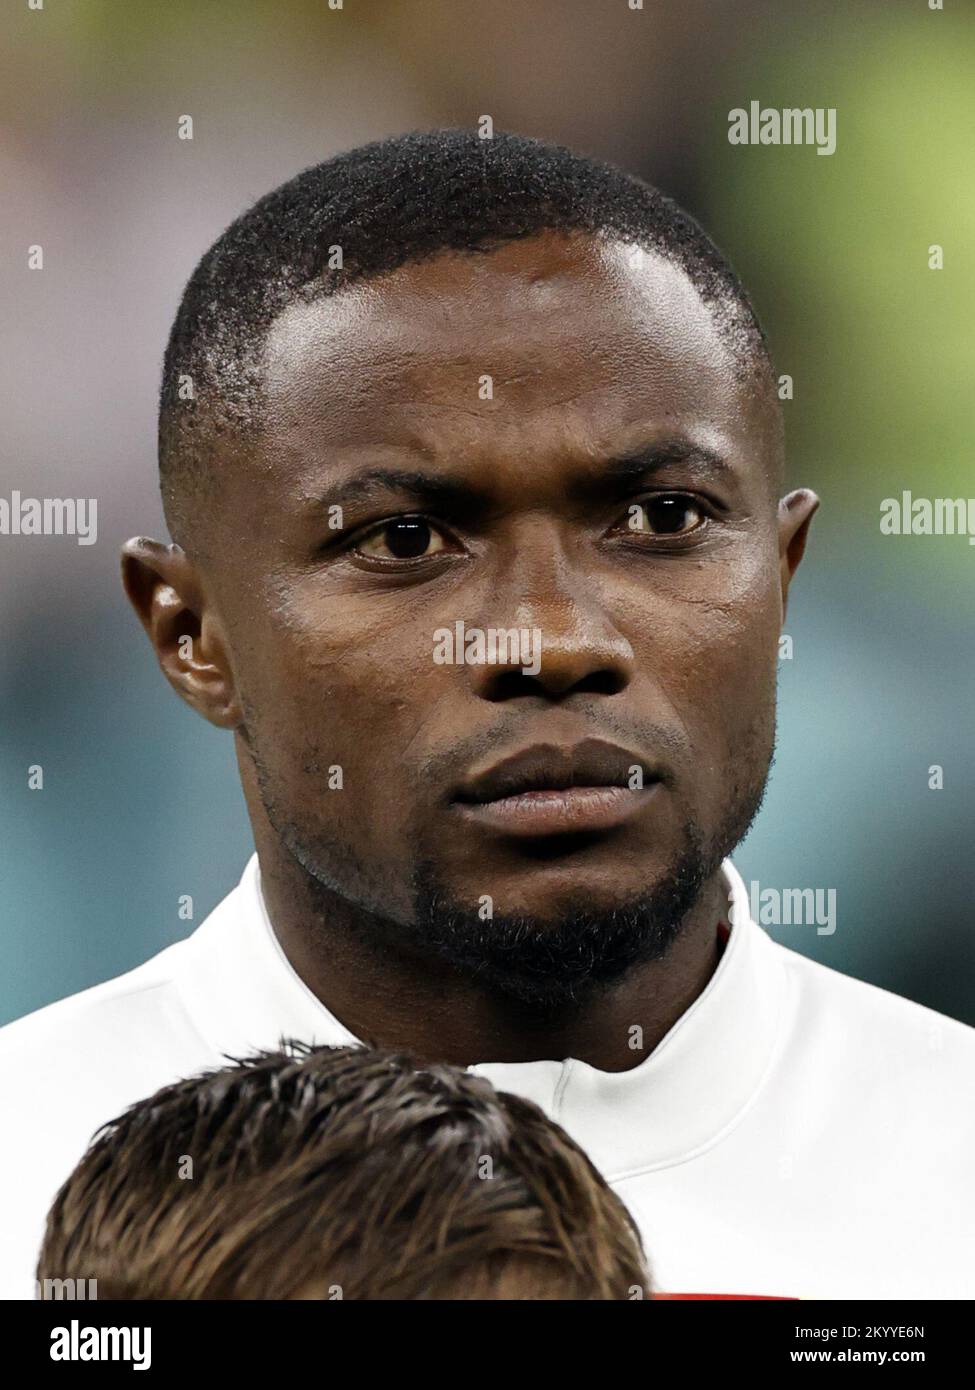 Qatar. 02nd Dec, 2022. LUSAIL CITY - Collins Fai of Cameroon during the FIFA World Cup Qatar 2022 group G match between Cameroon and Brazil at Lusail Stadium on December 2, 2022 in Lusail City, Qatar. AP | Dutch Height | MAURICE OF STONE Credit: ANP/Alamy Live News Stock Photo